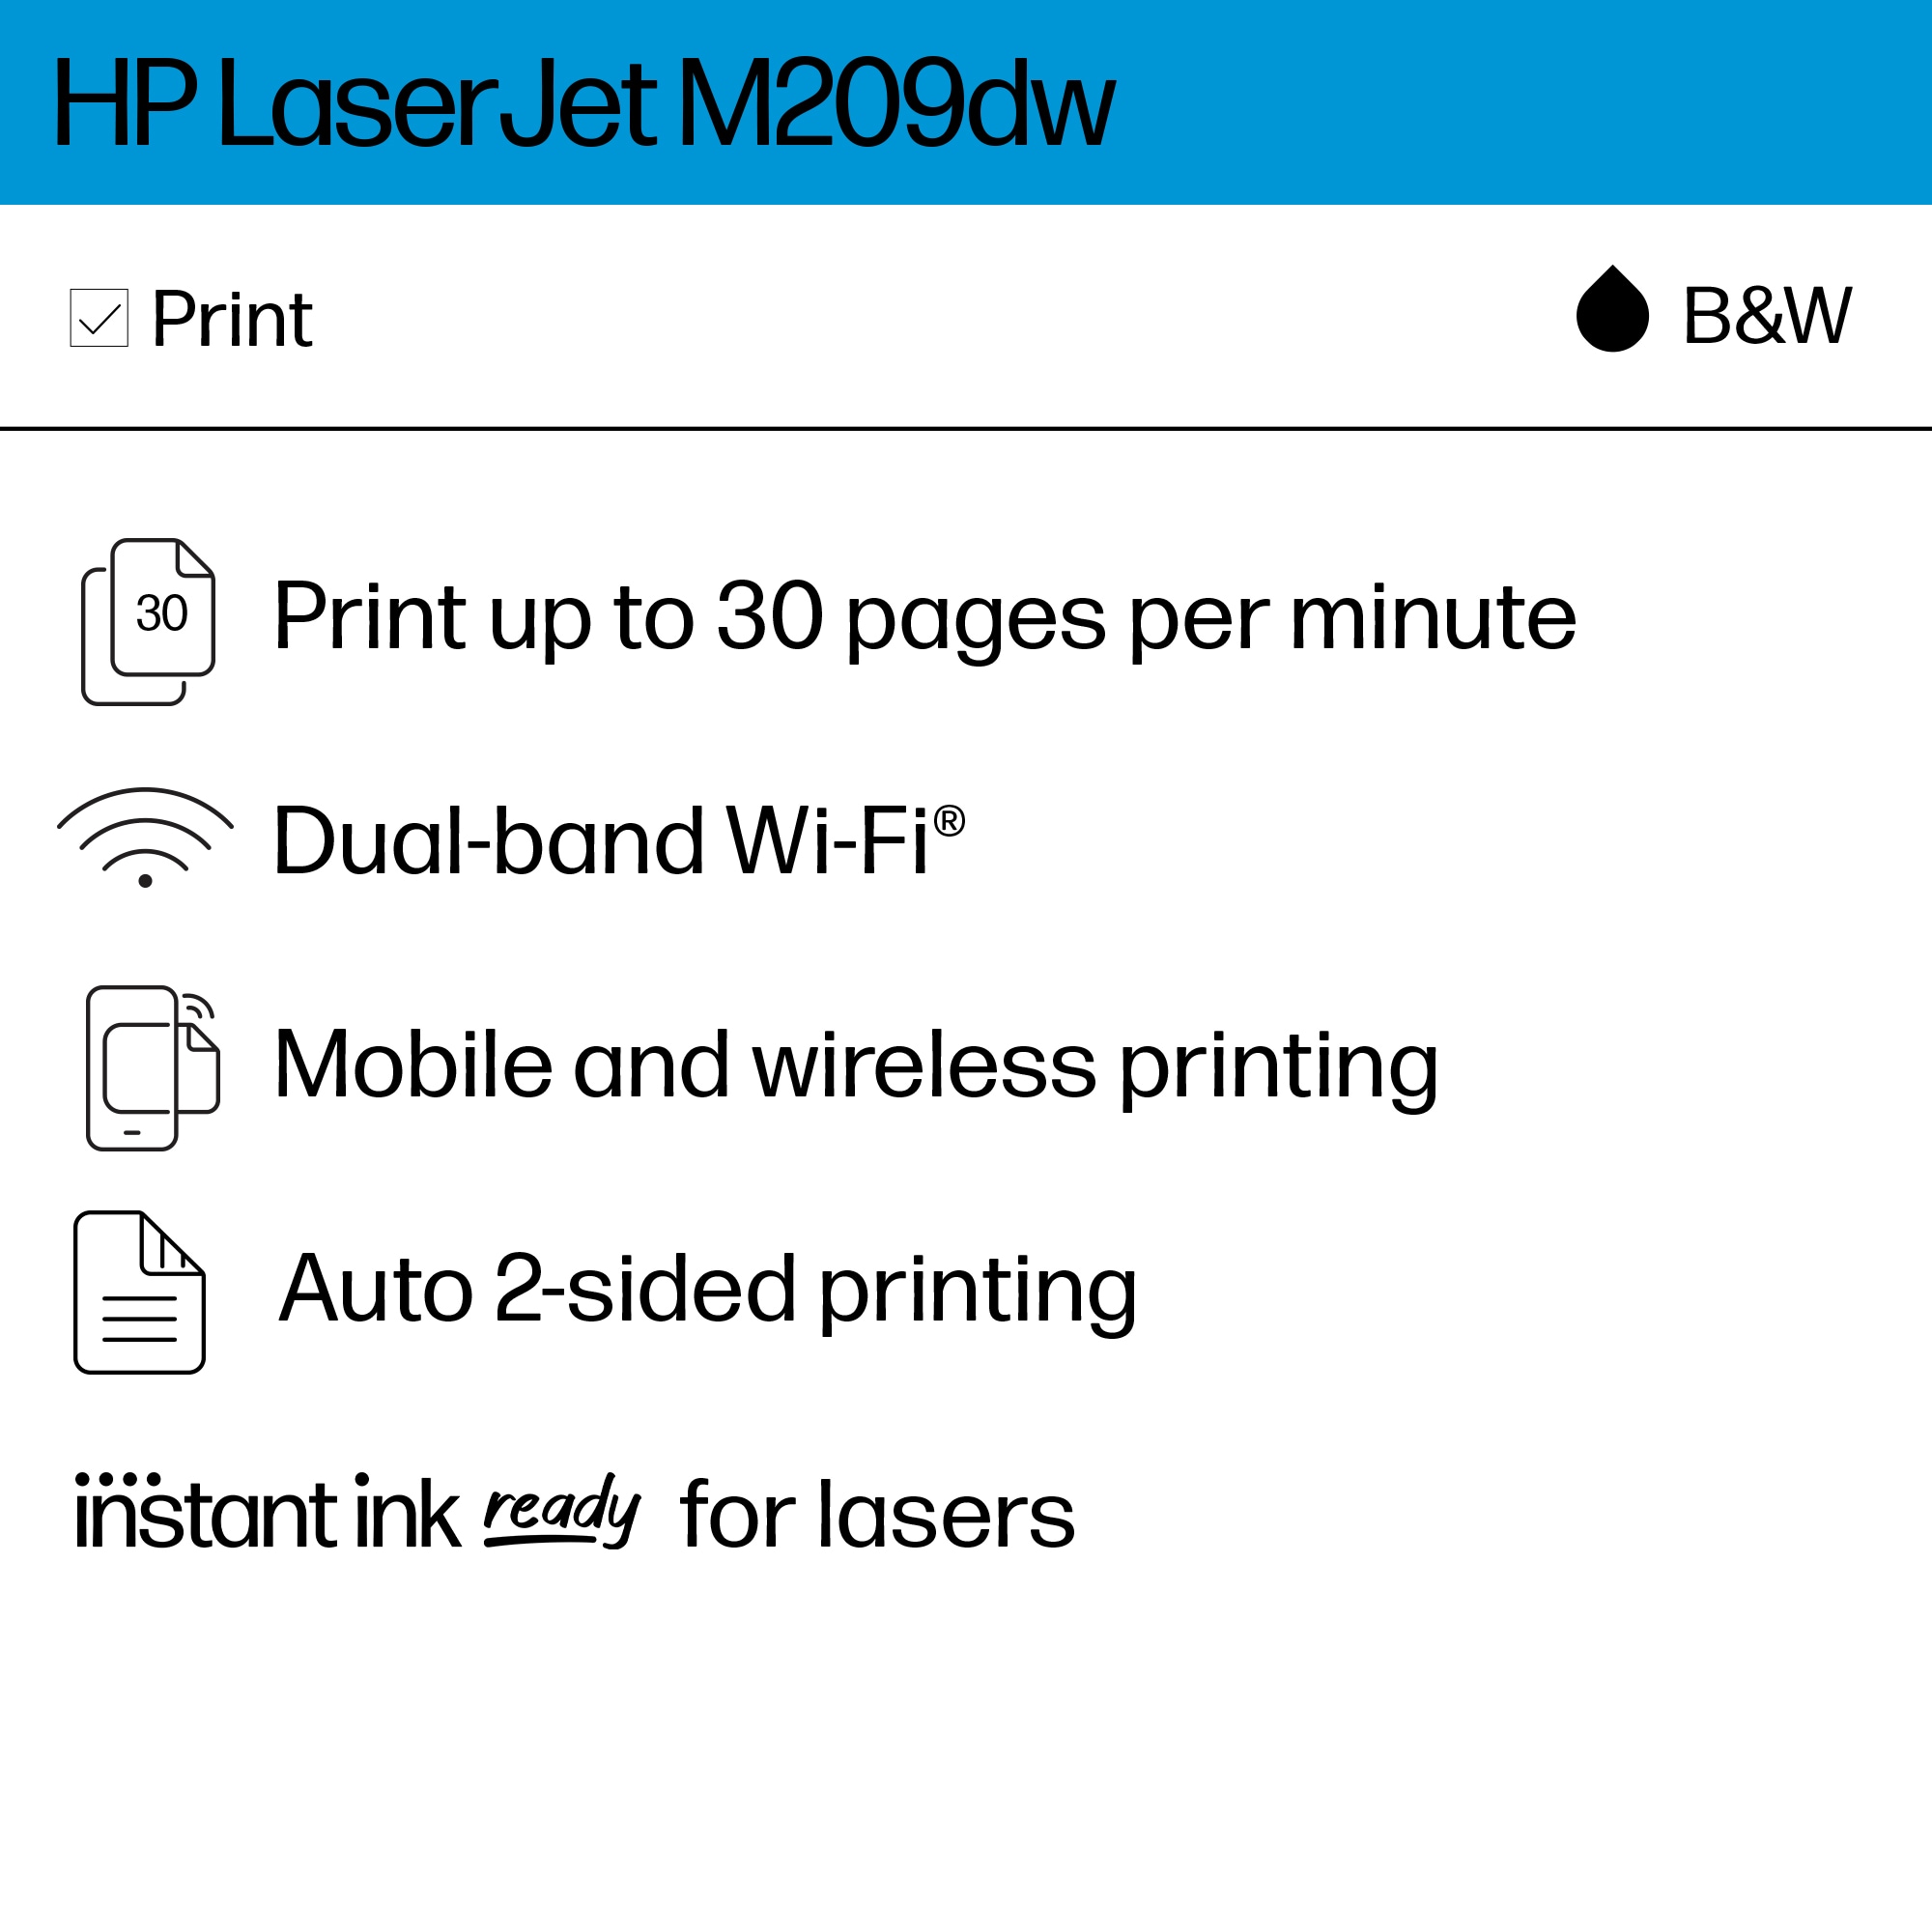 M209dw LaserJet with Instant Ink HP Printer months 2 available